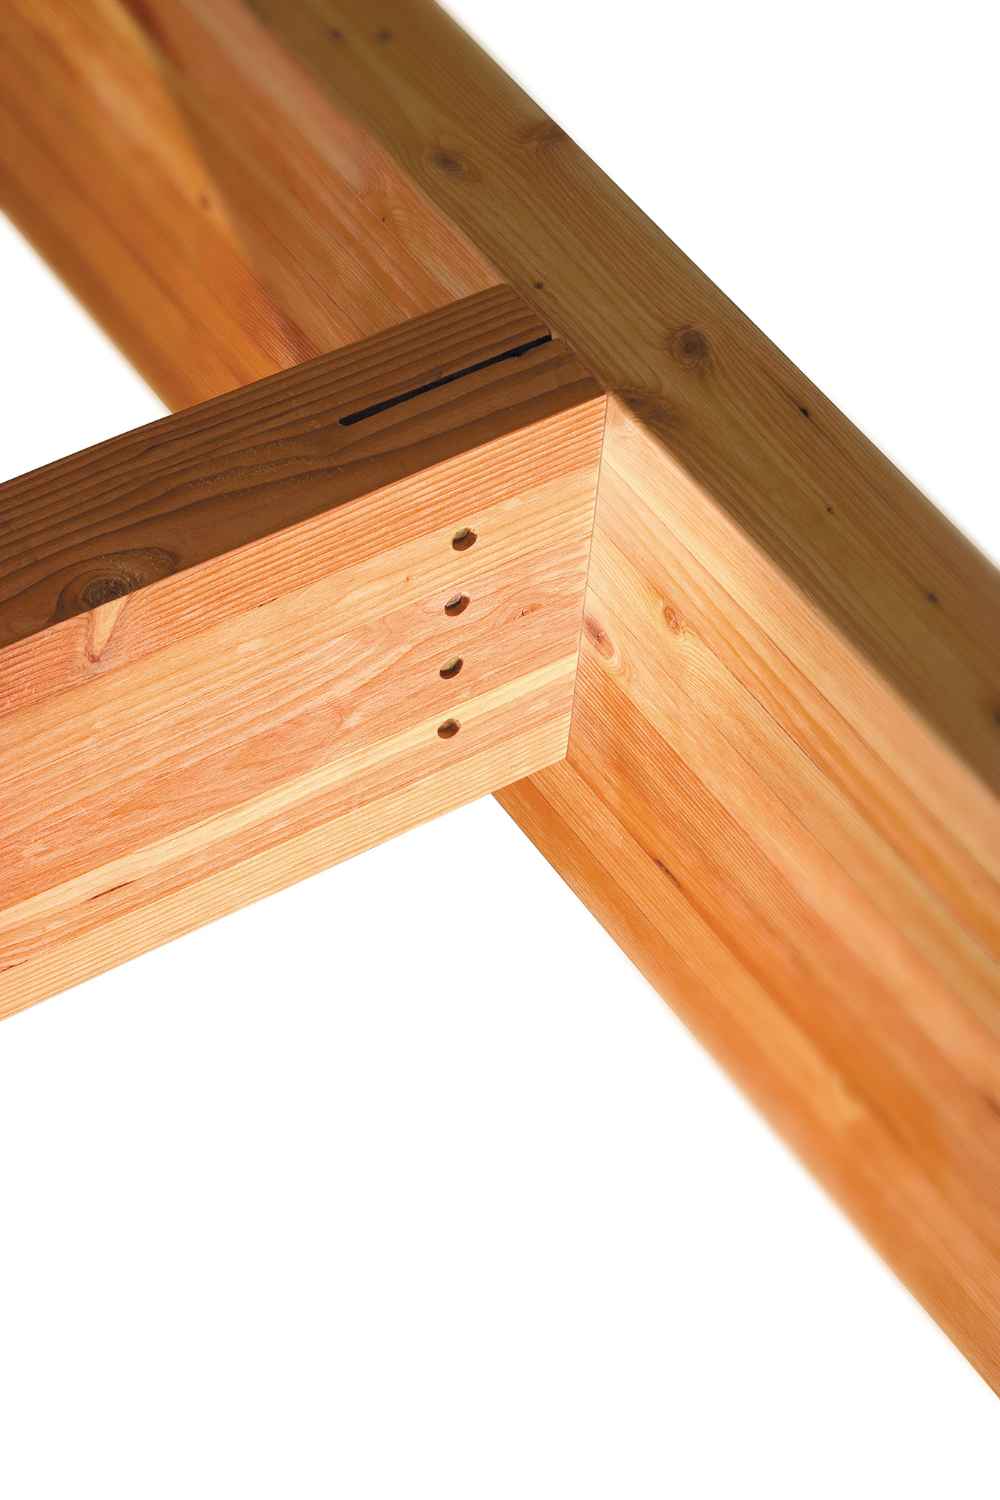 Simpson CJT5ZL Concealed Joist Tie w Long Pins ZMAX Finish image 4 of 5